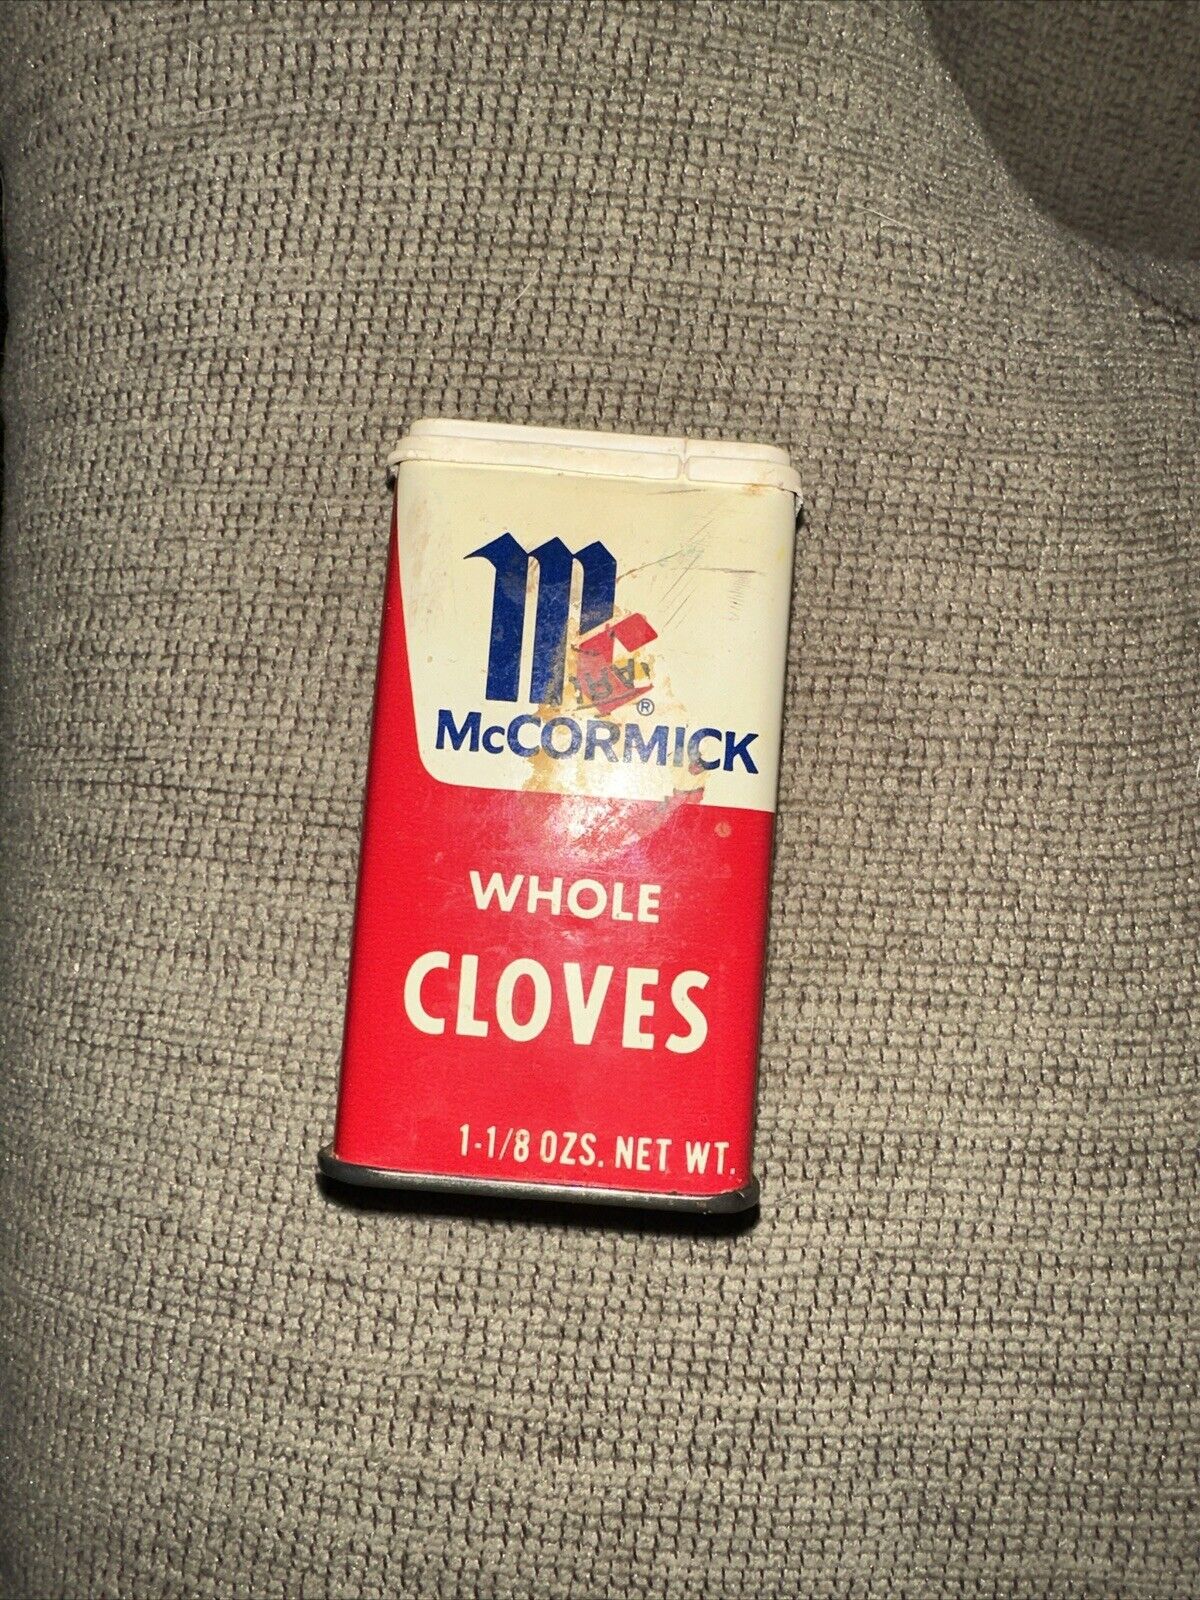 McCormick Spice Tin Whole Cloves Red White 1.12 oz Baltimore MD Vintage 1977